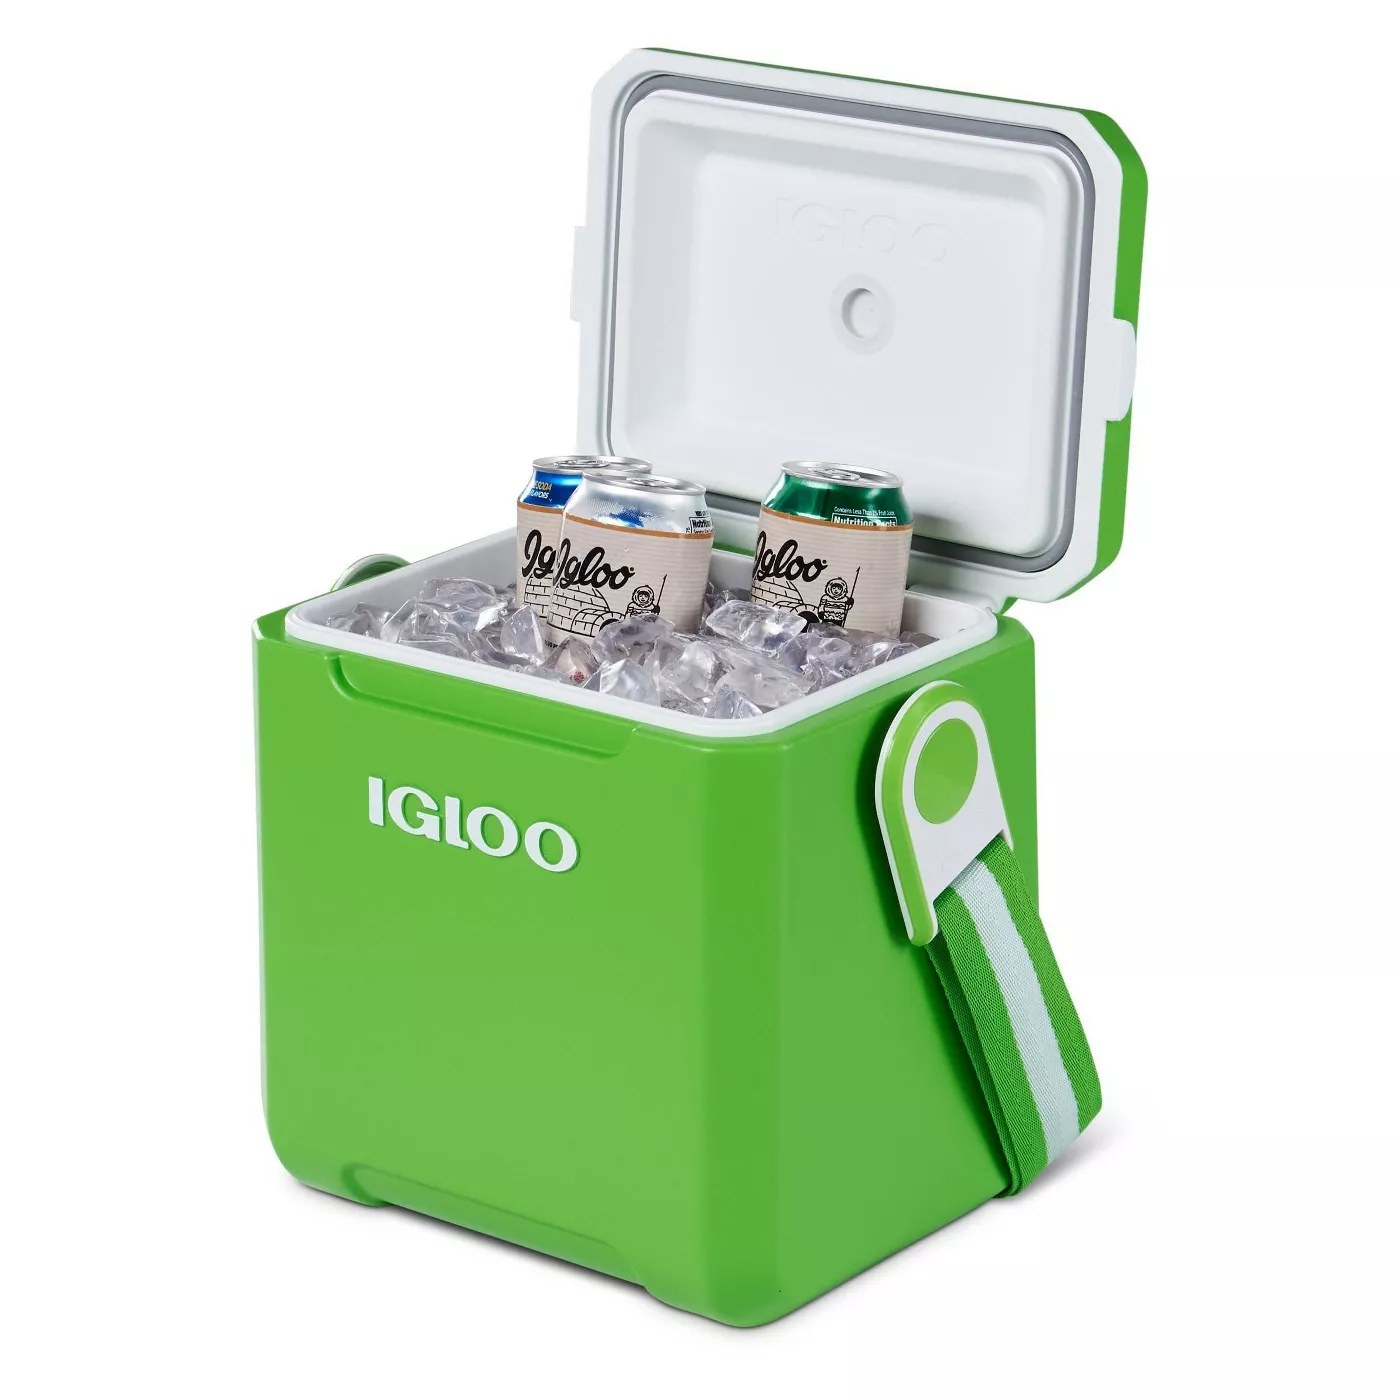 The green cooler with a matching straps and several drinks inside